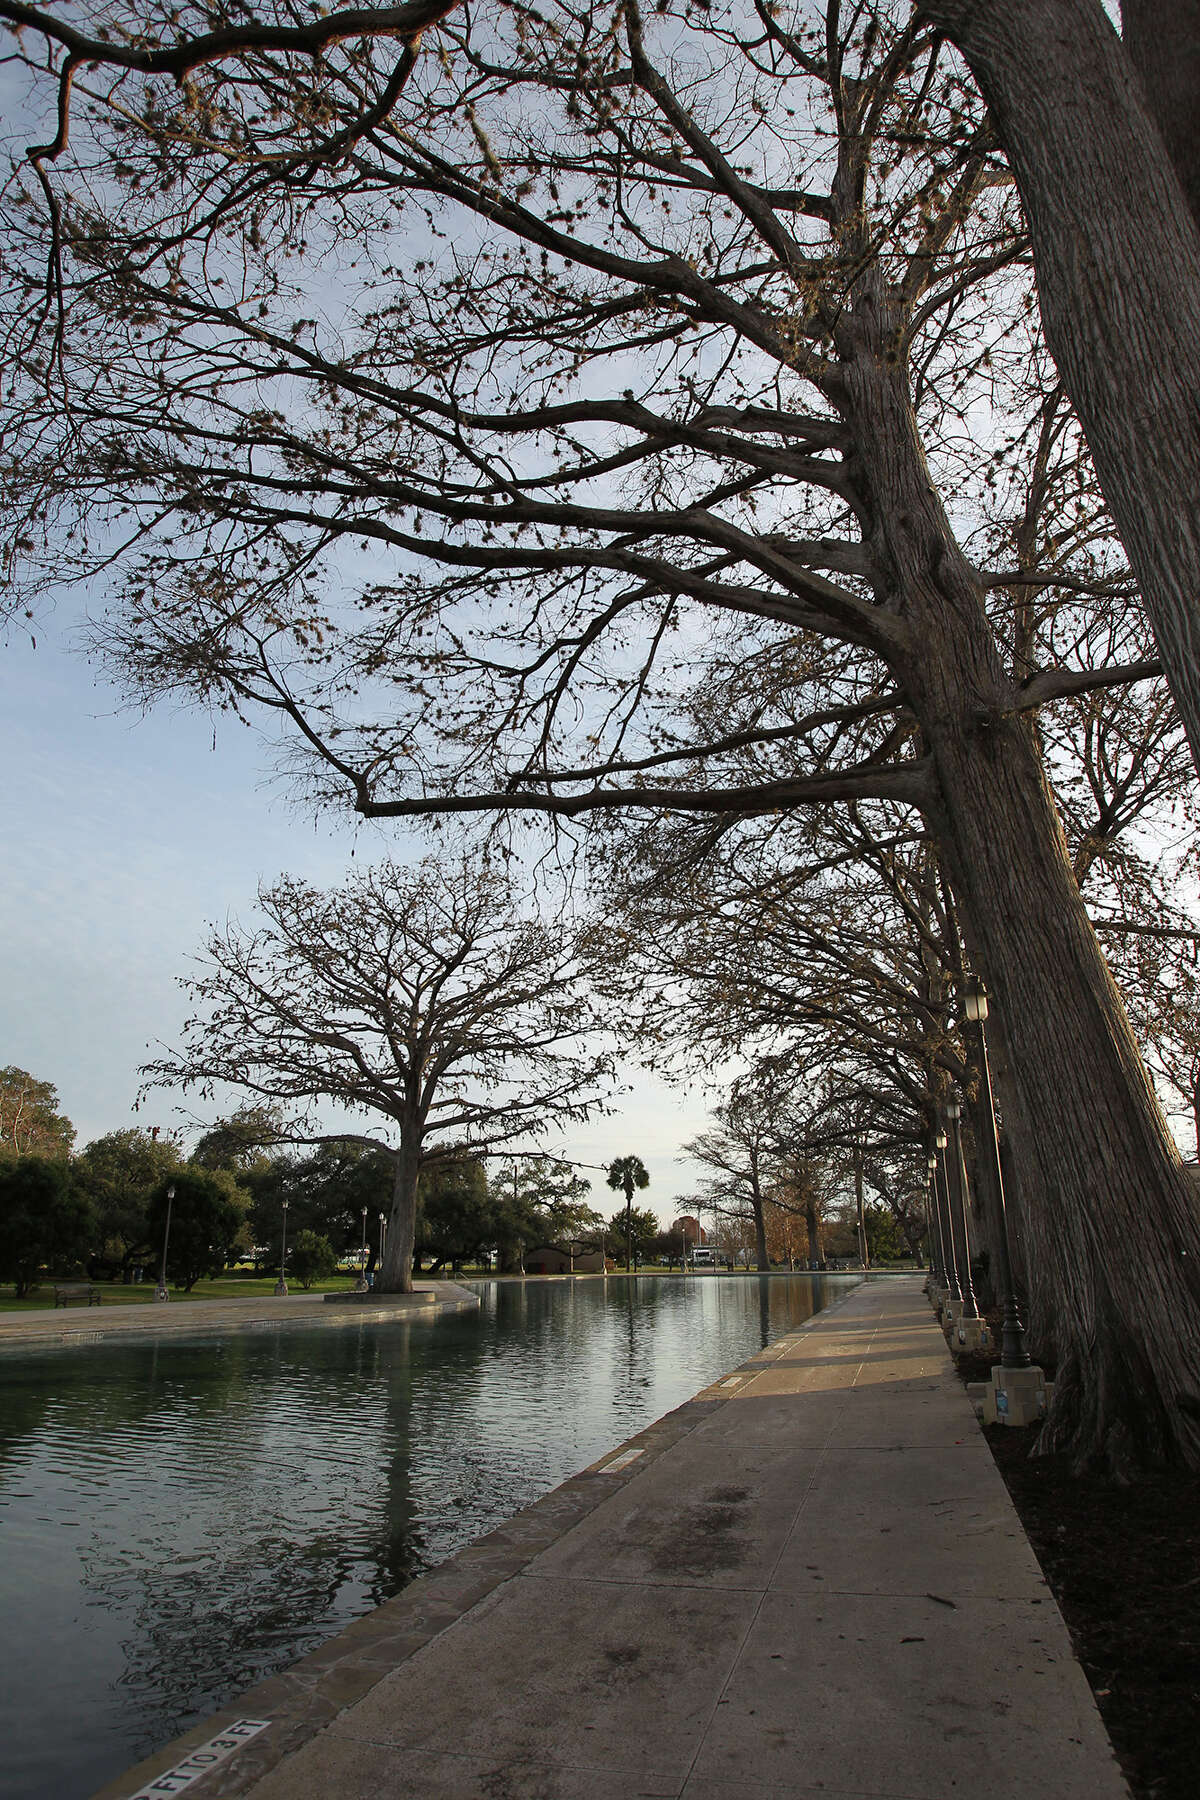 Huge cypress trees line the pool area at San Pedro Park on a bright winter’s day.